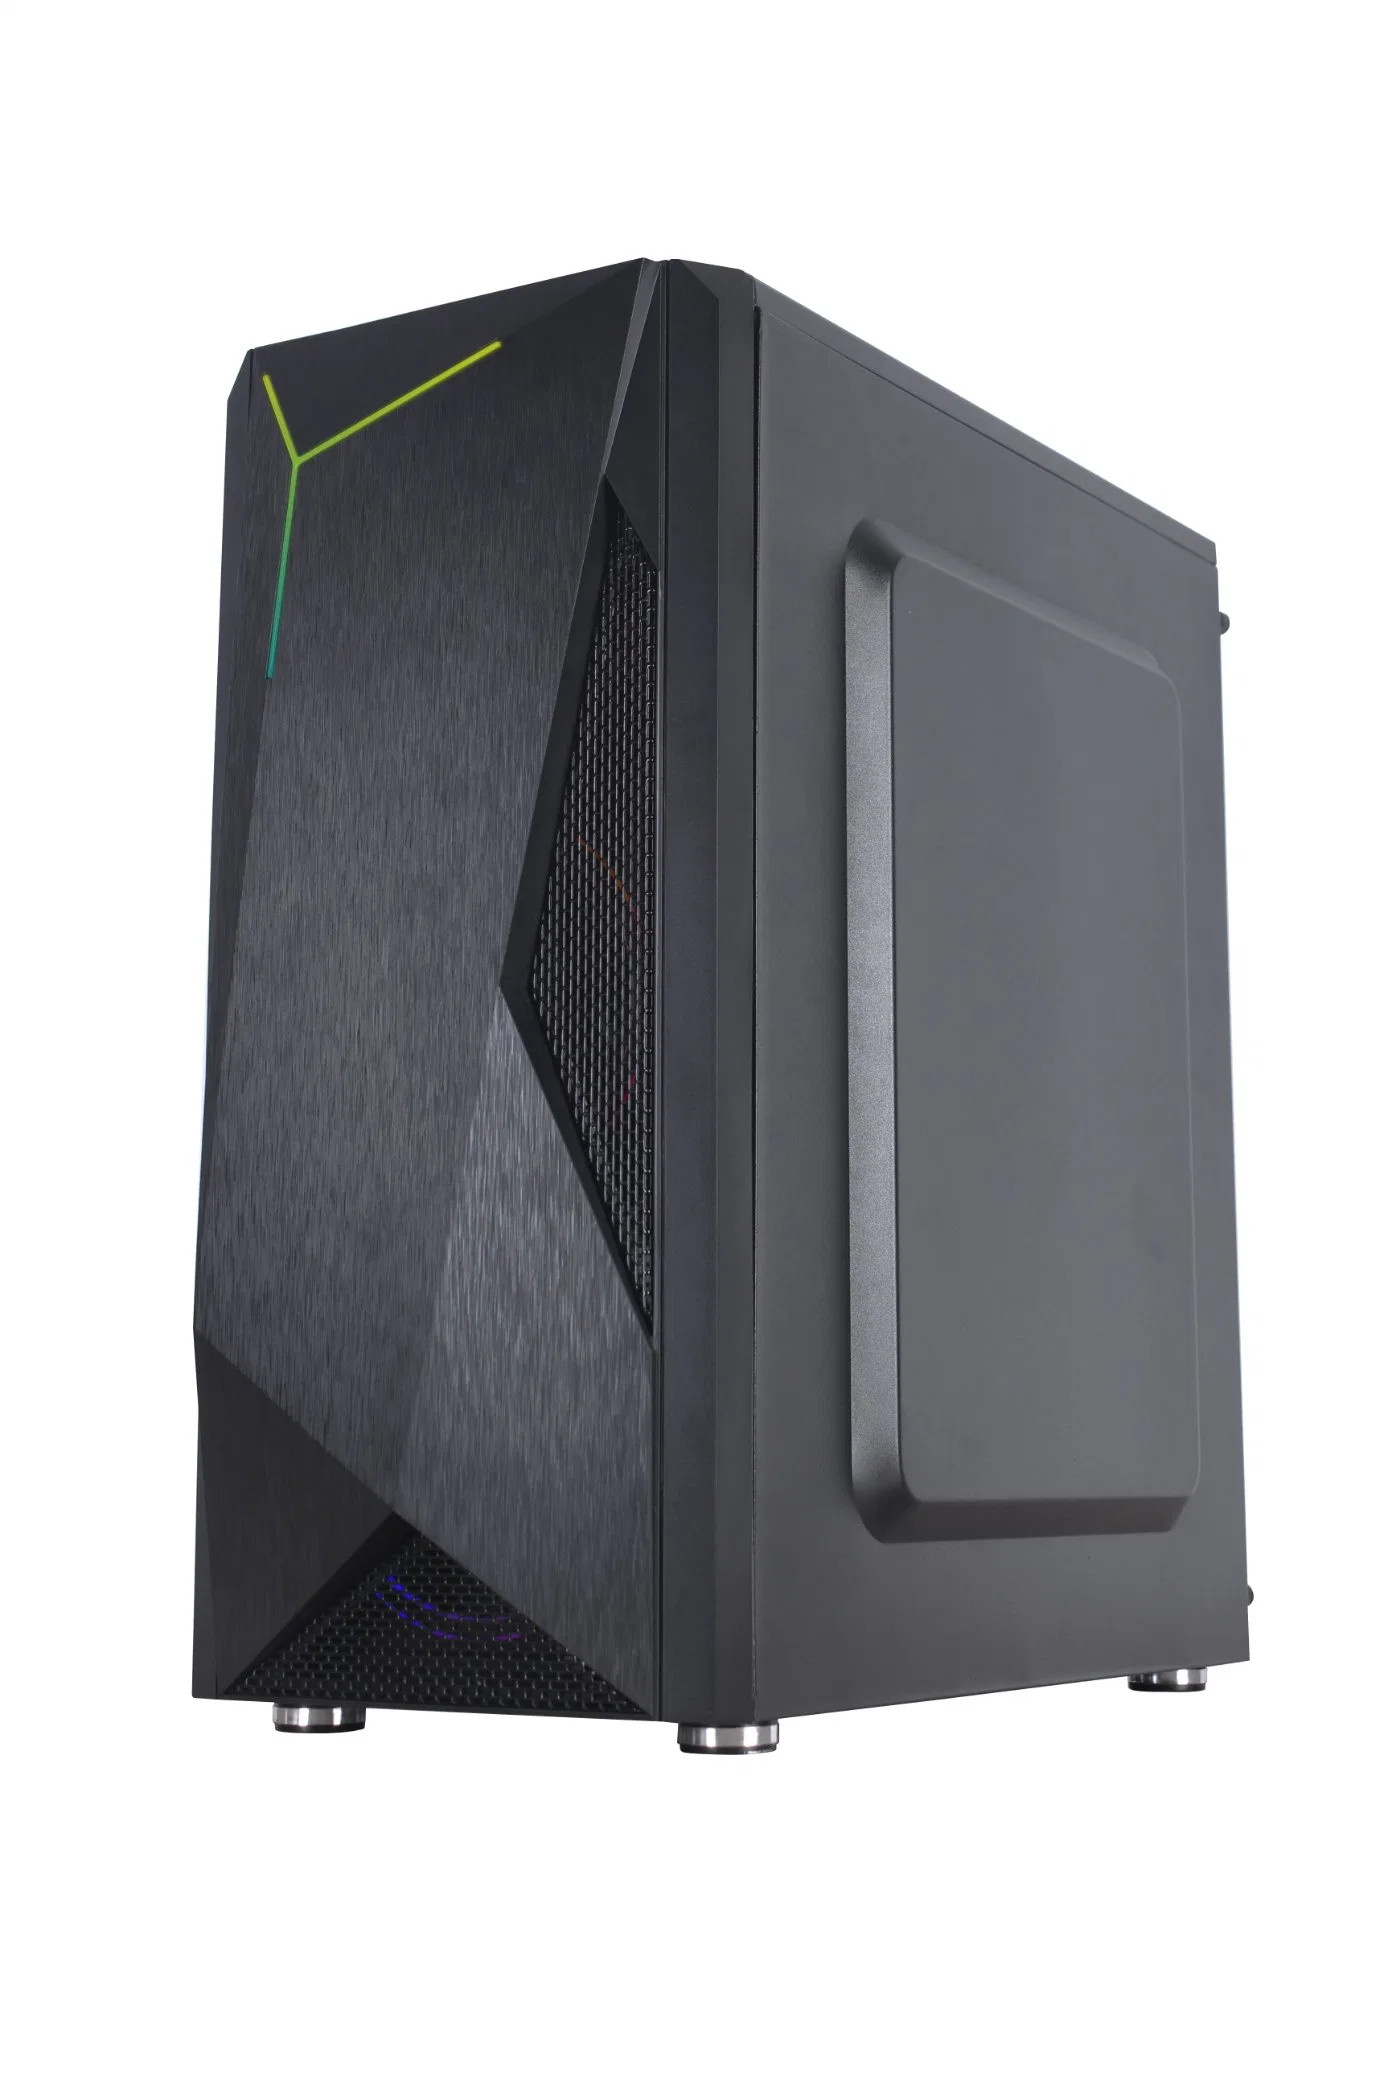 New Design with RGB Fans ATX Computer Cabinet Gaming PC Case